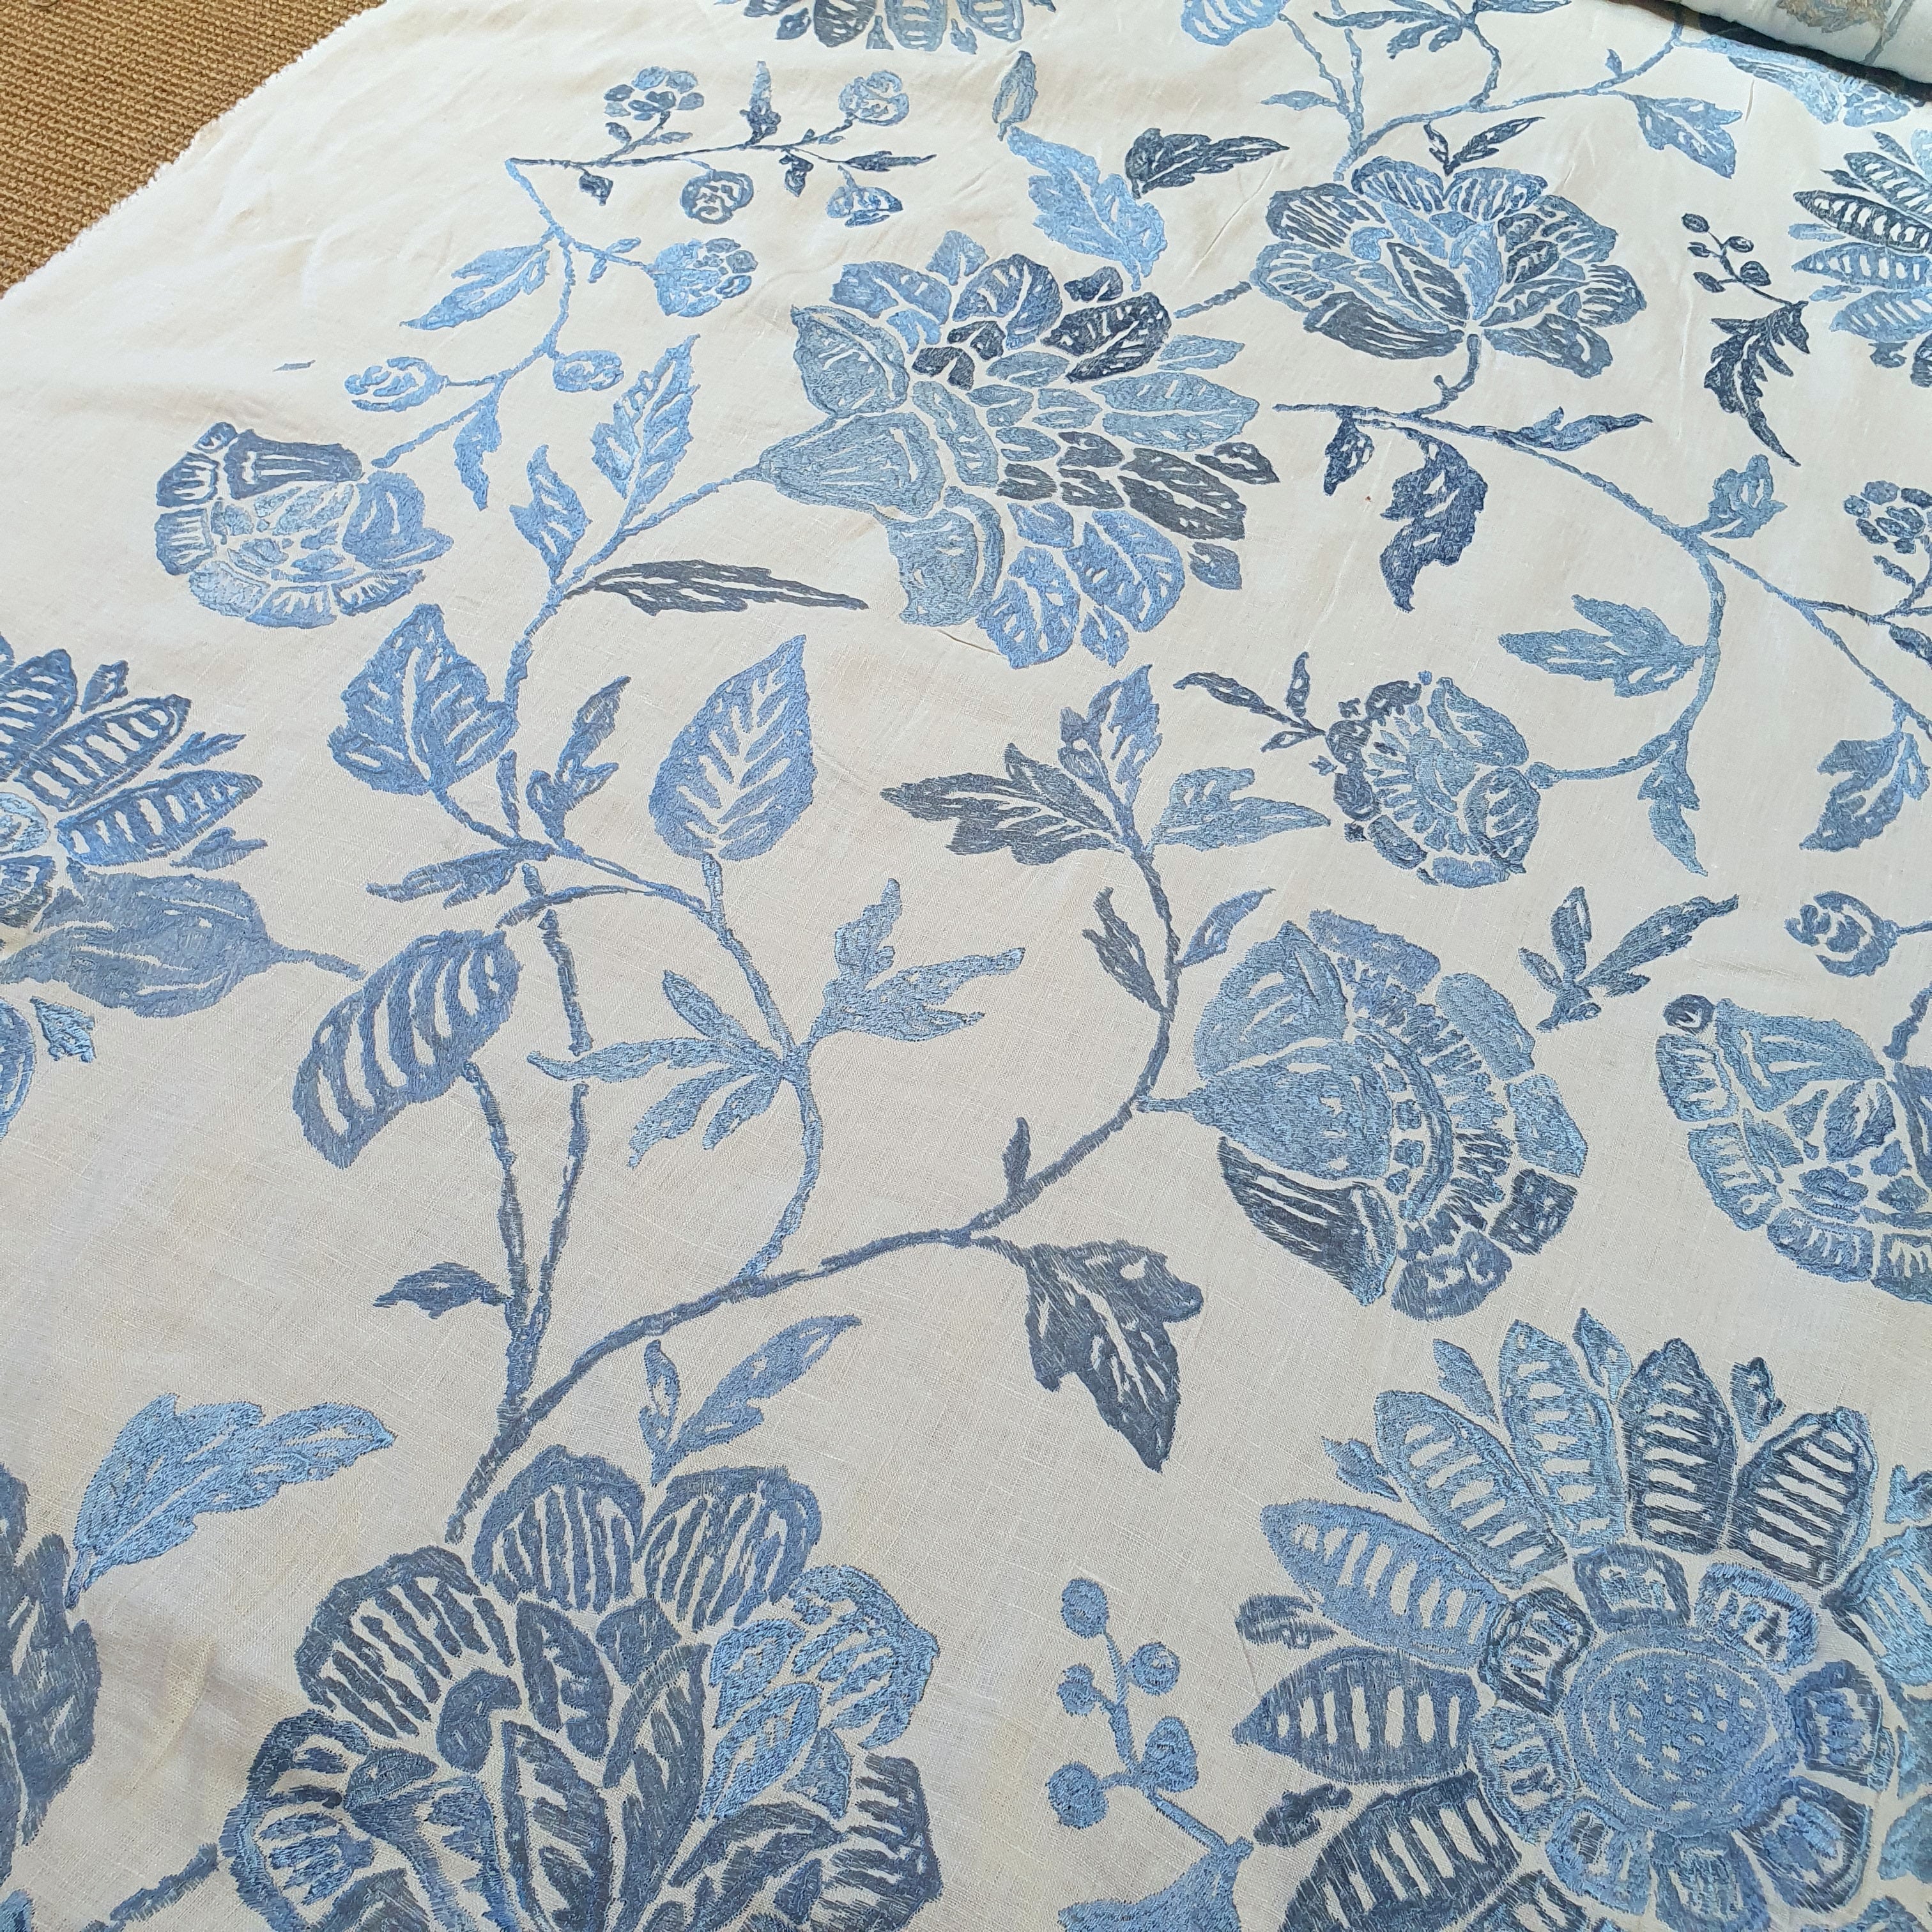 Large-Scale Embroidered Floral Linen